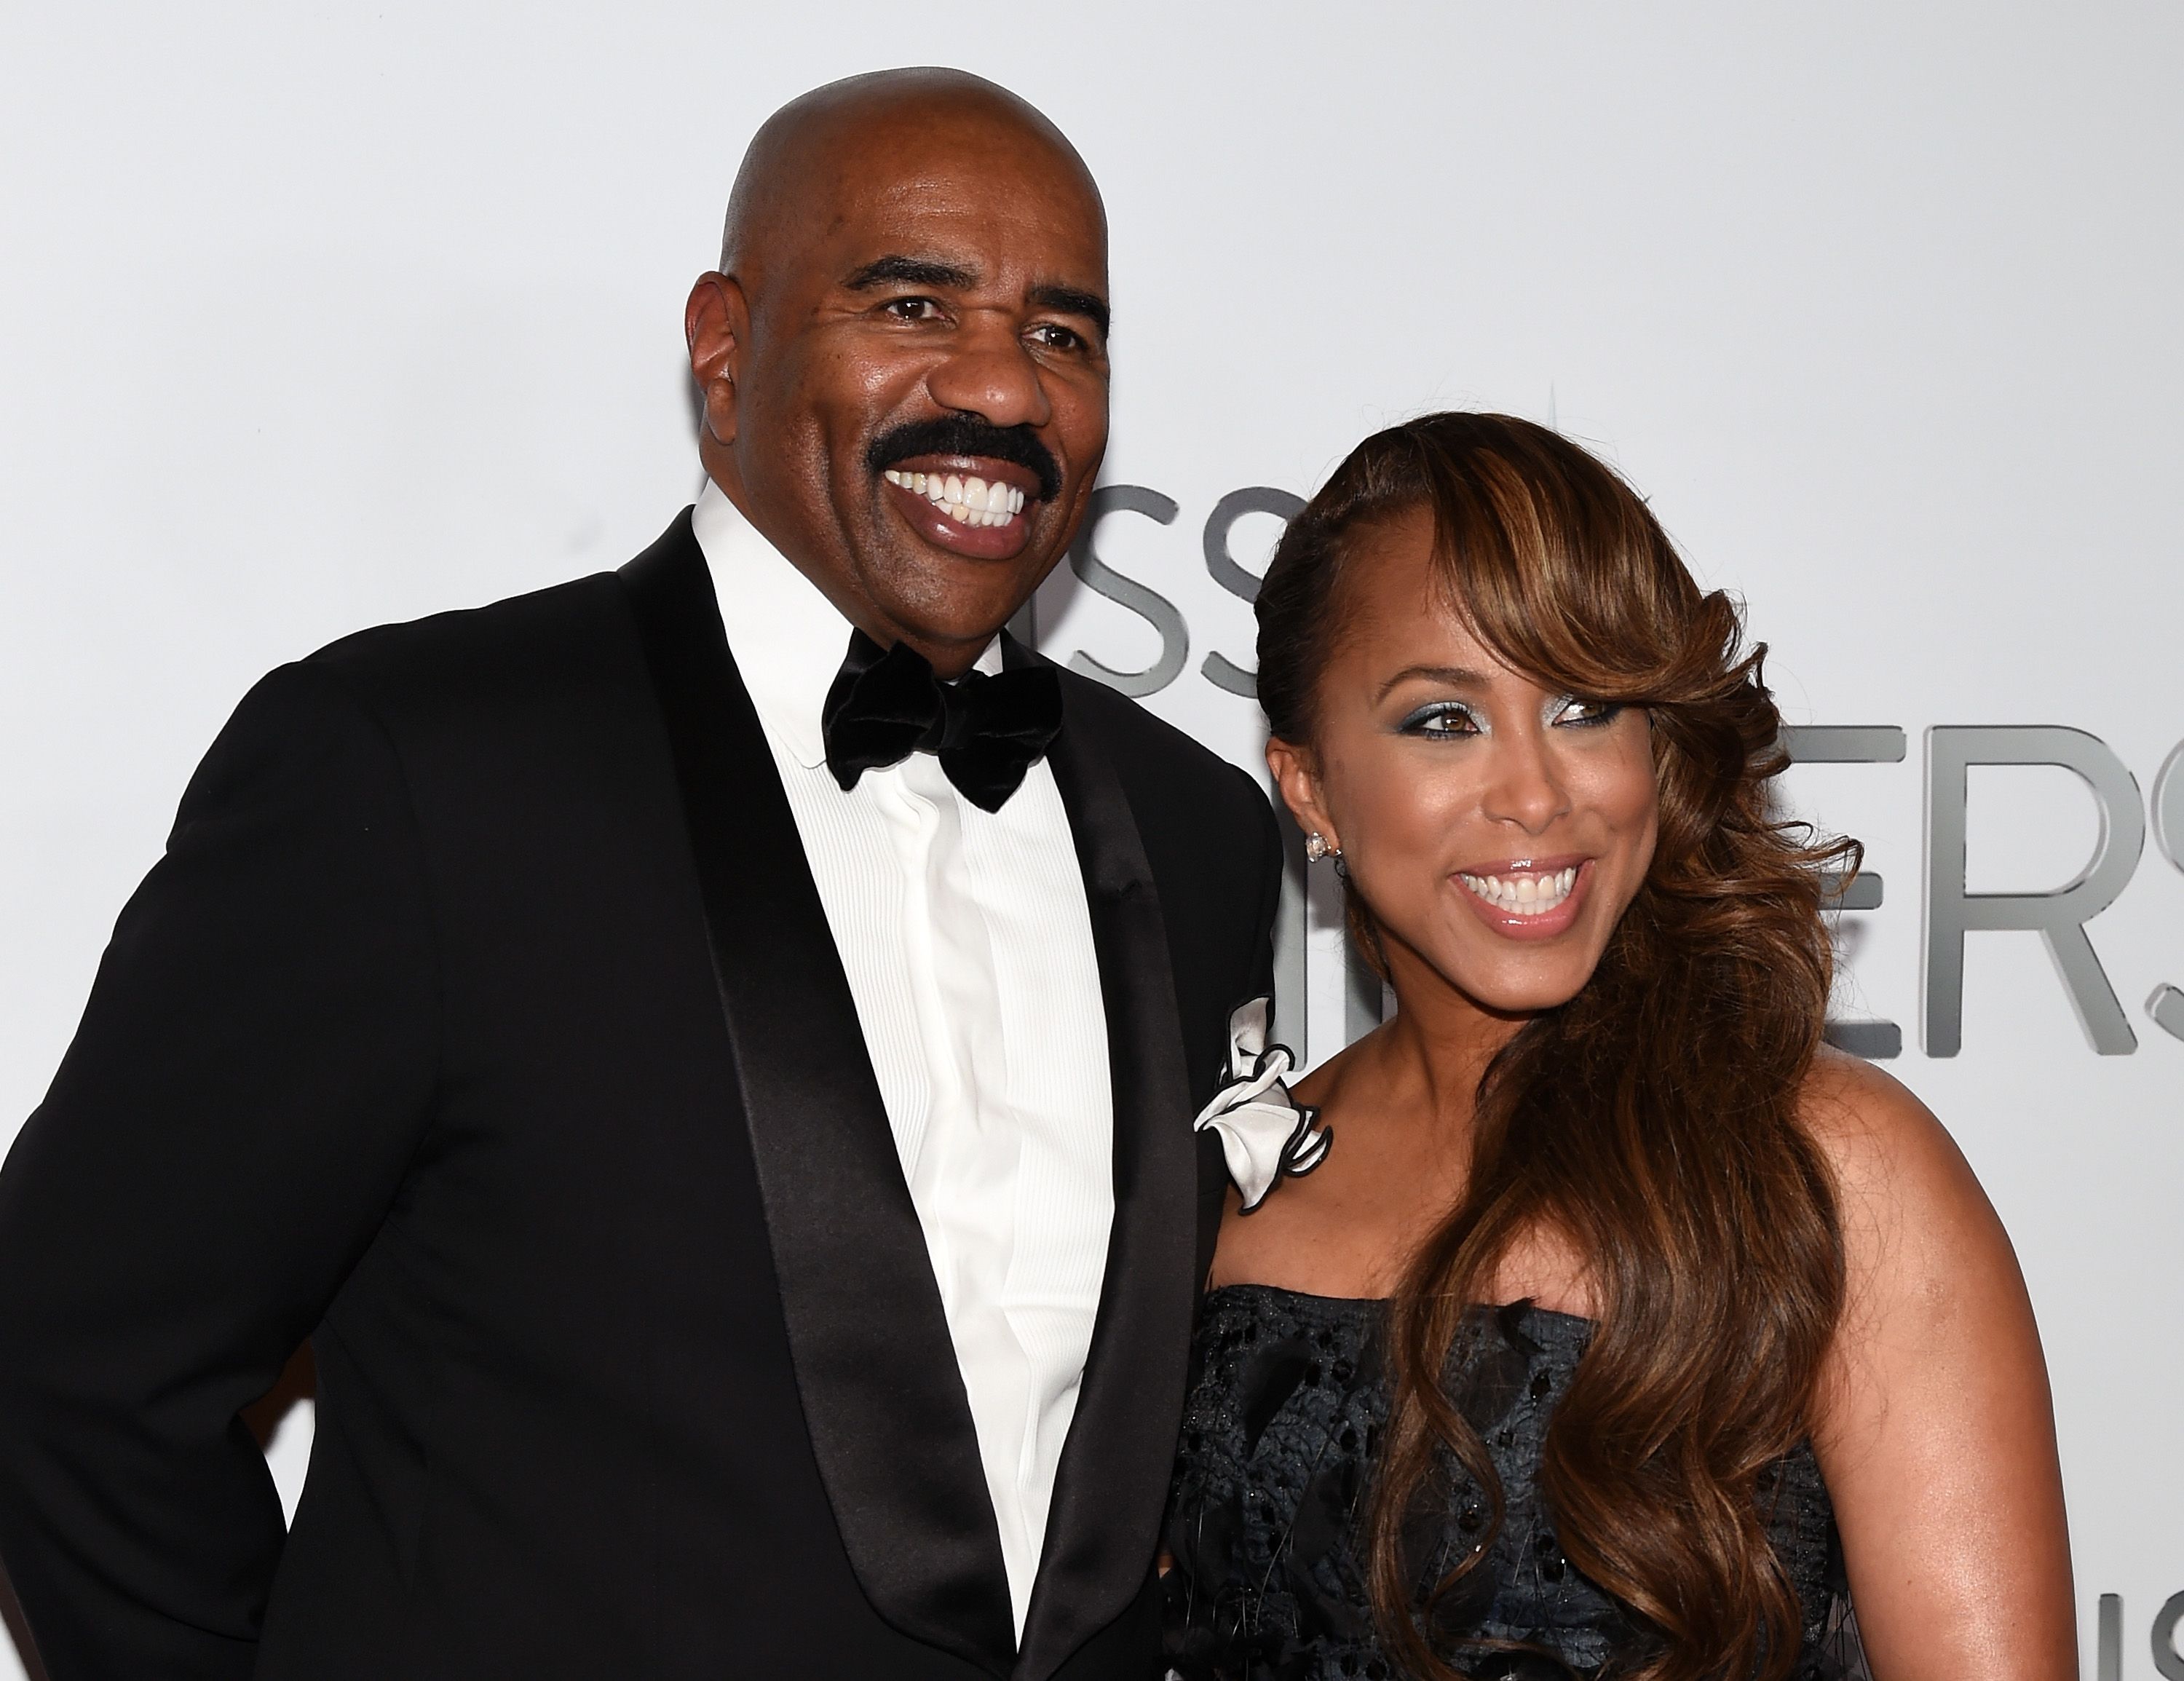 Steve Harvey and his wife Marjorie Harvey at the 2015 Miss Universe Pageant at Planet Hollywood Resort & Casino on December 20, 2015 in Las Vegas, Nevada | Photo: Getty Images  